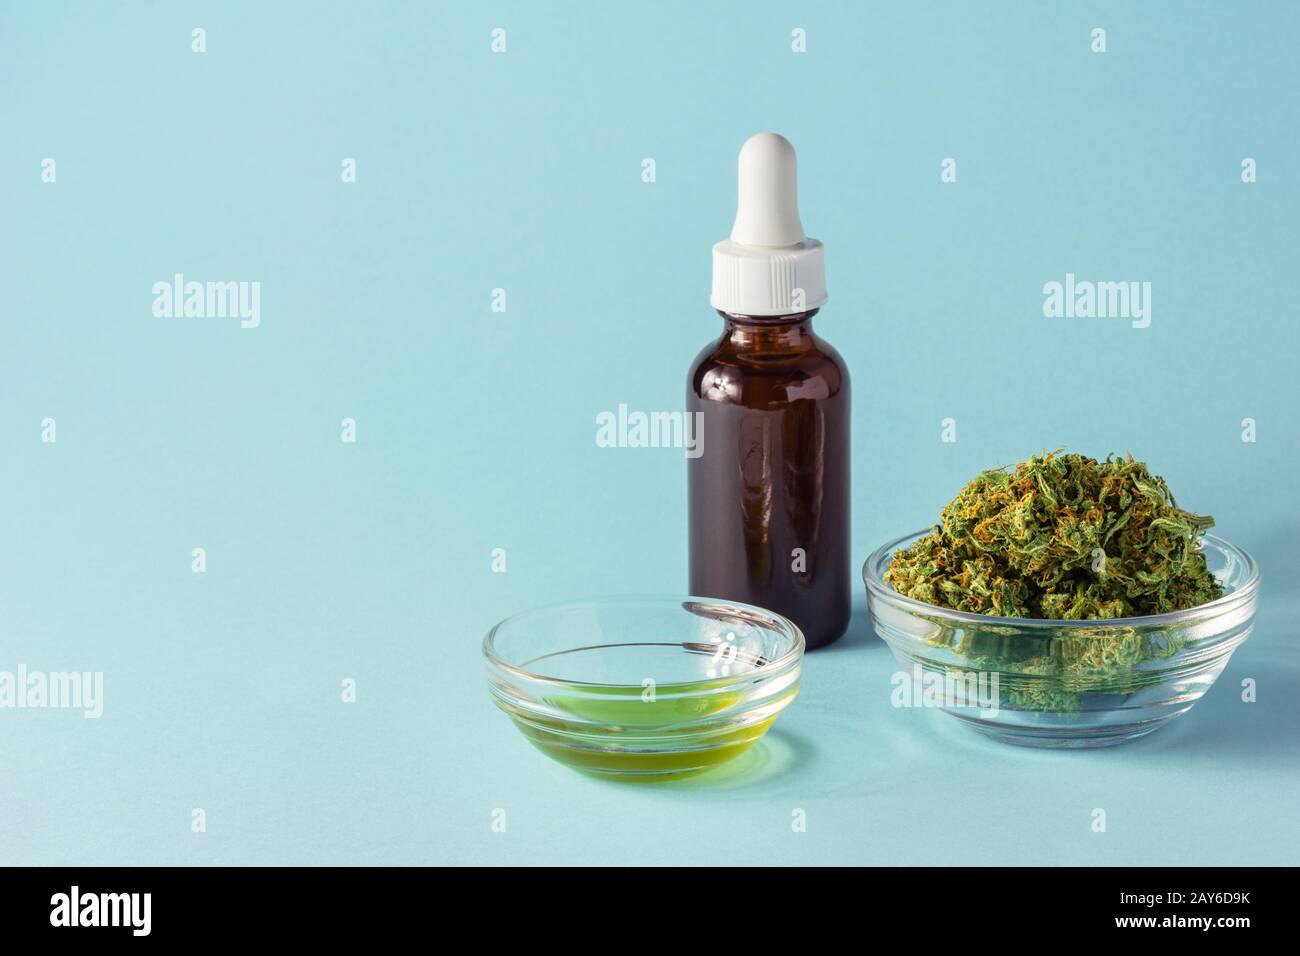 Glass Bottle and Dish of CBD or THC Oil with Hemp or Cannabis Buds on Aqua Blue Background Stock Photo